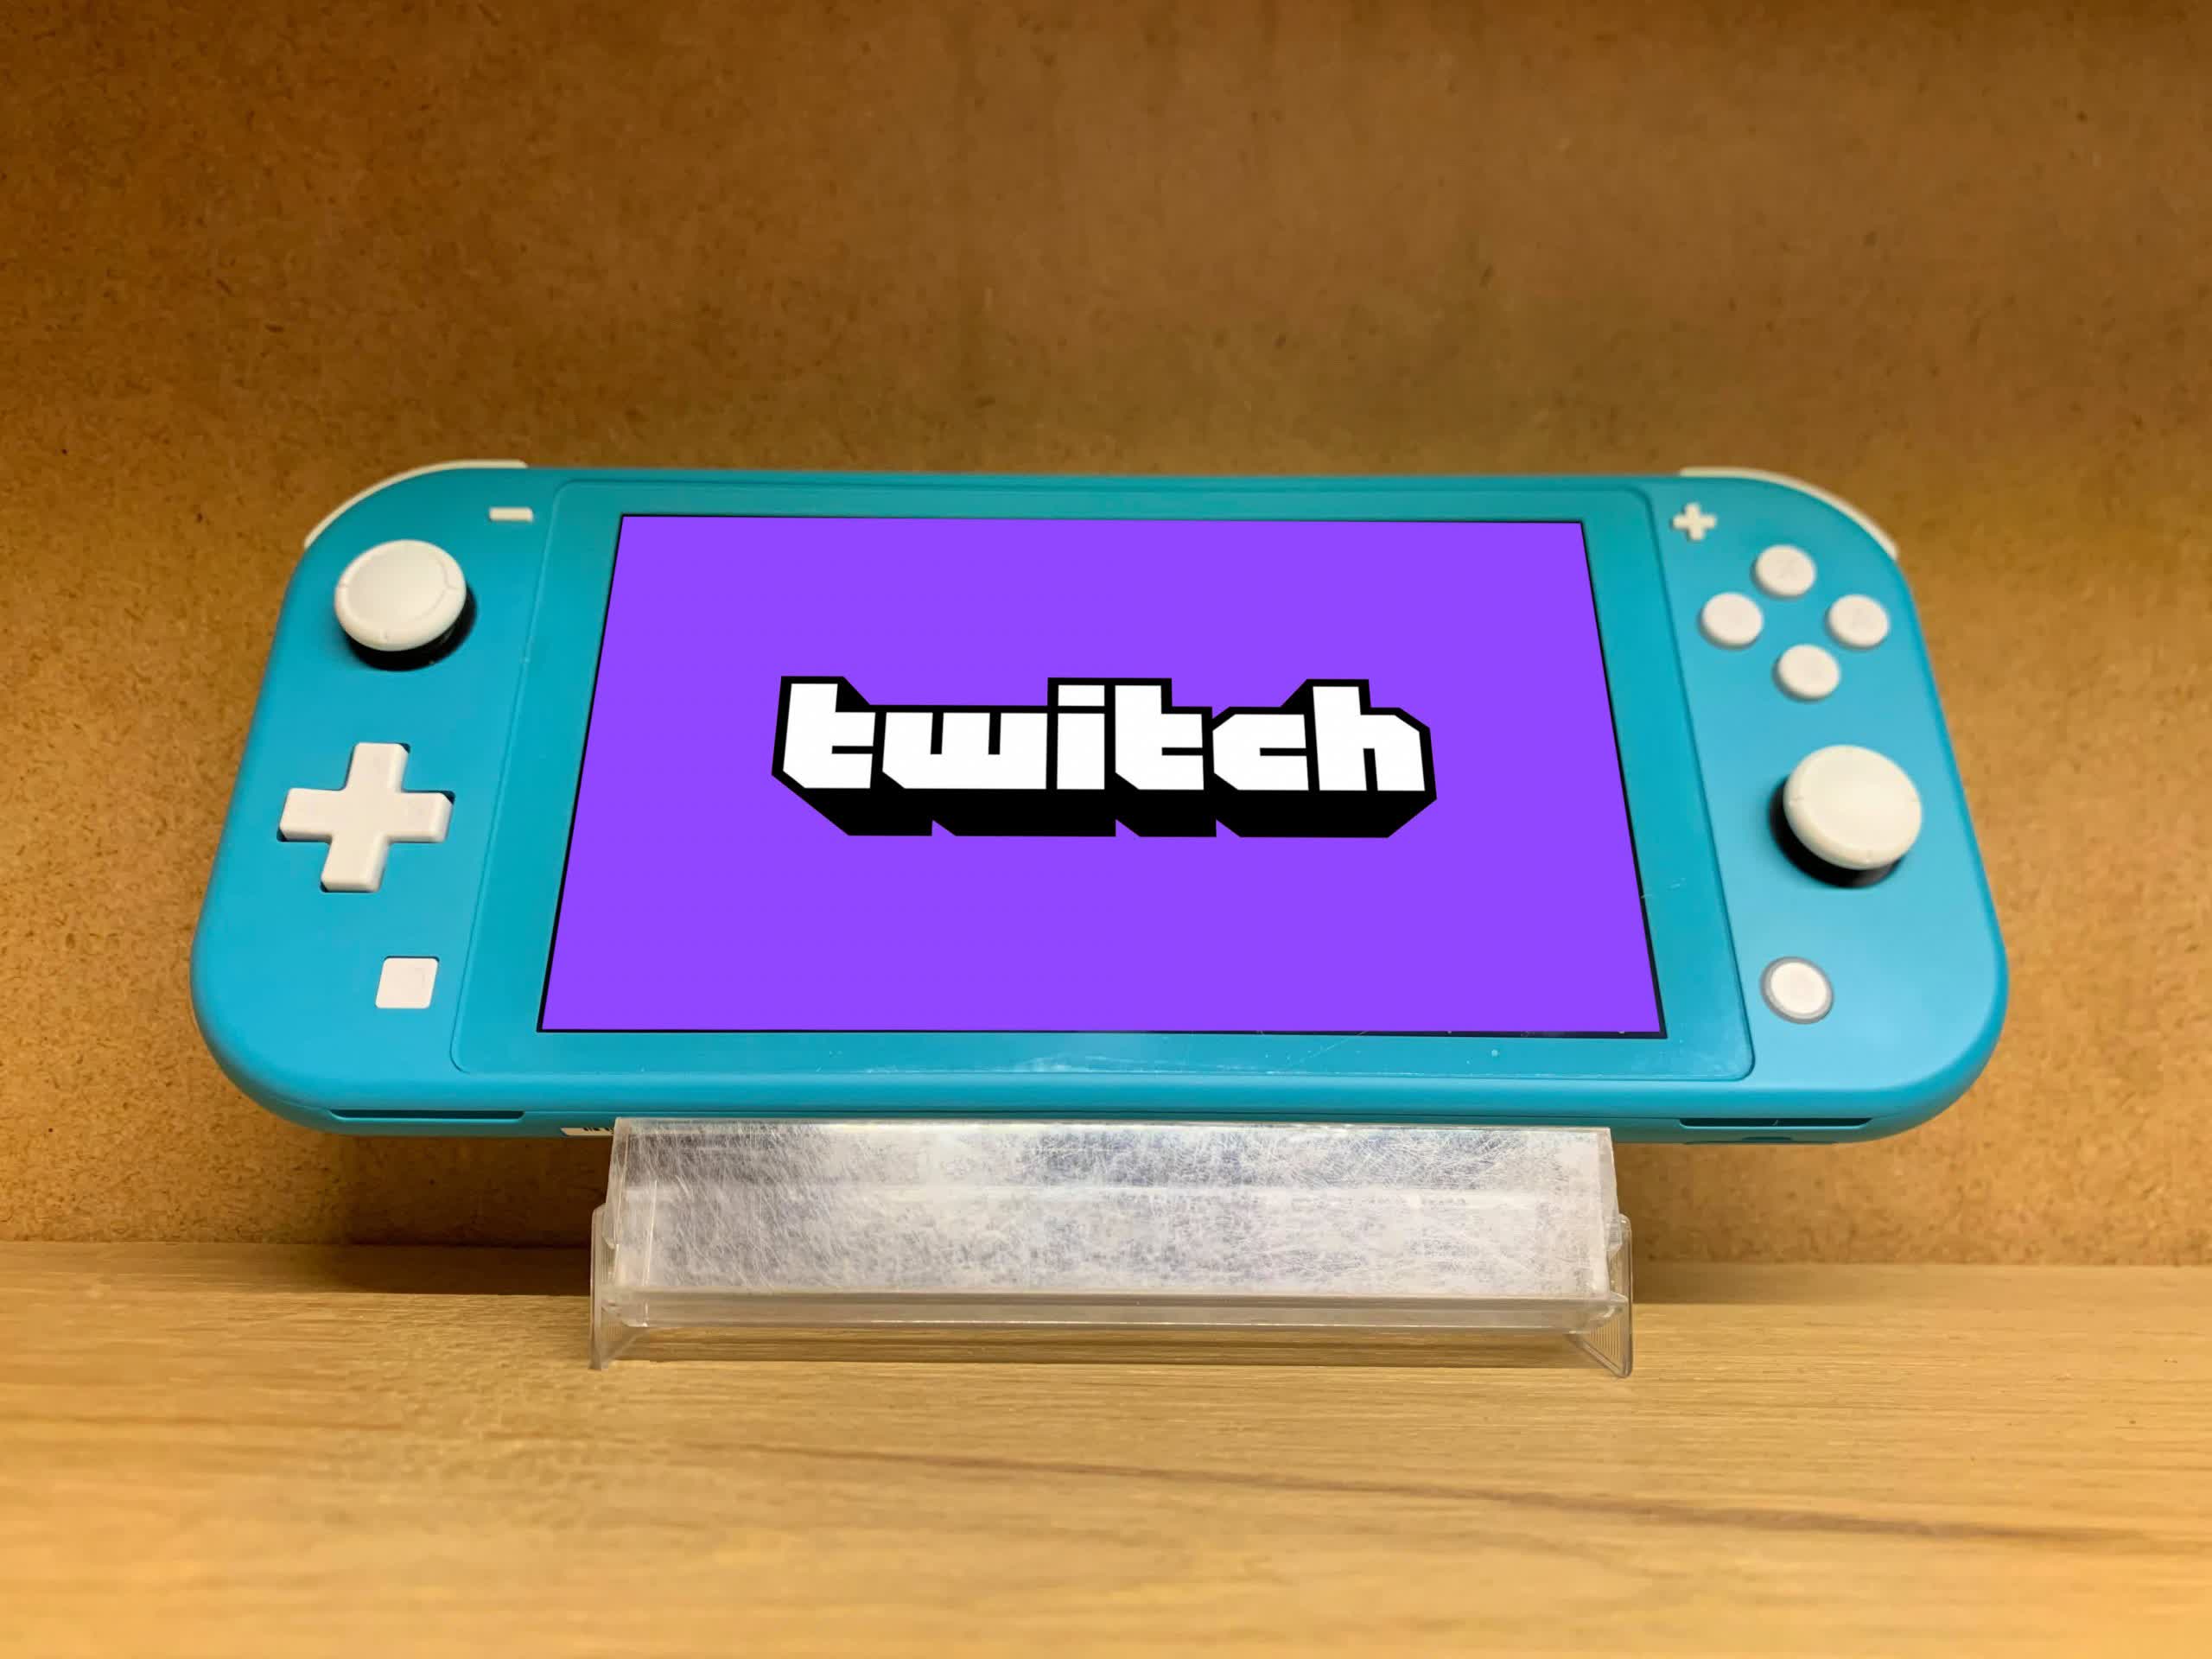 Nintendo Switch gets a somewhat limited Twitch app